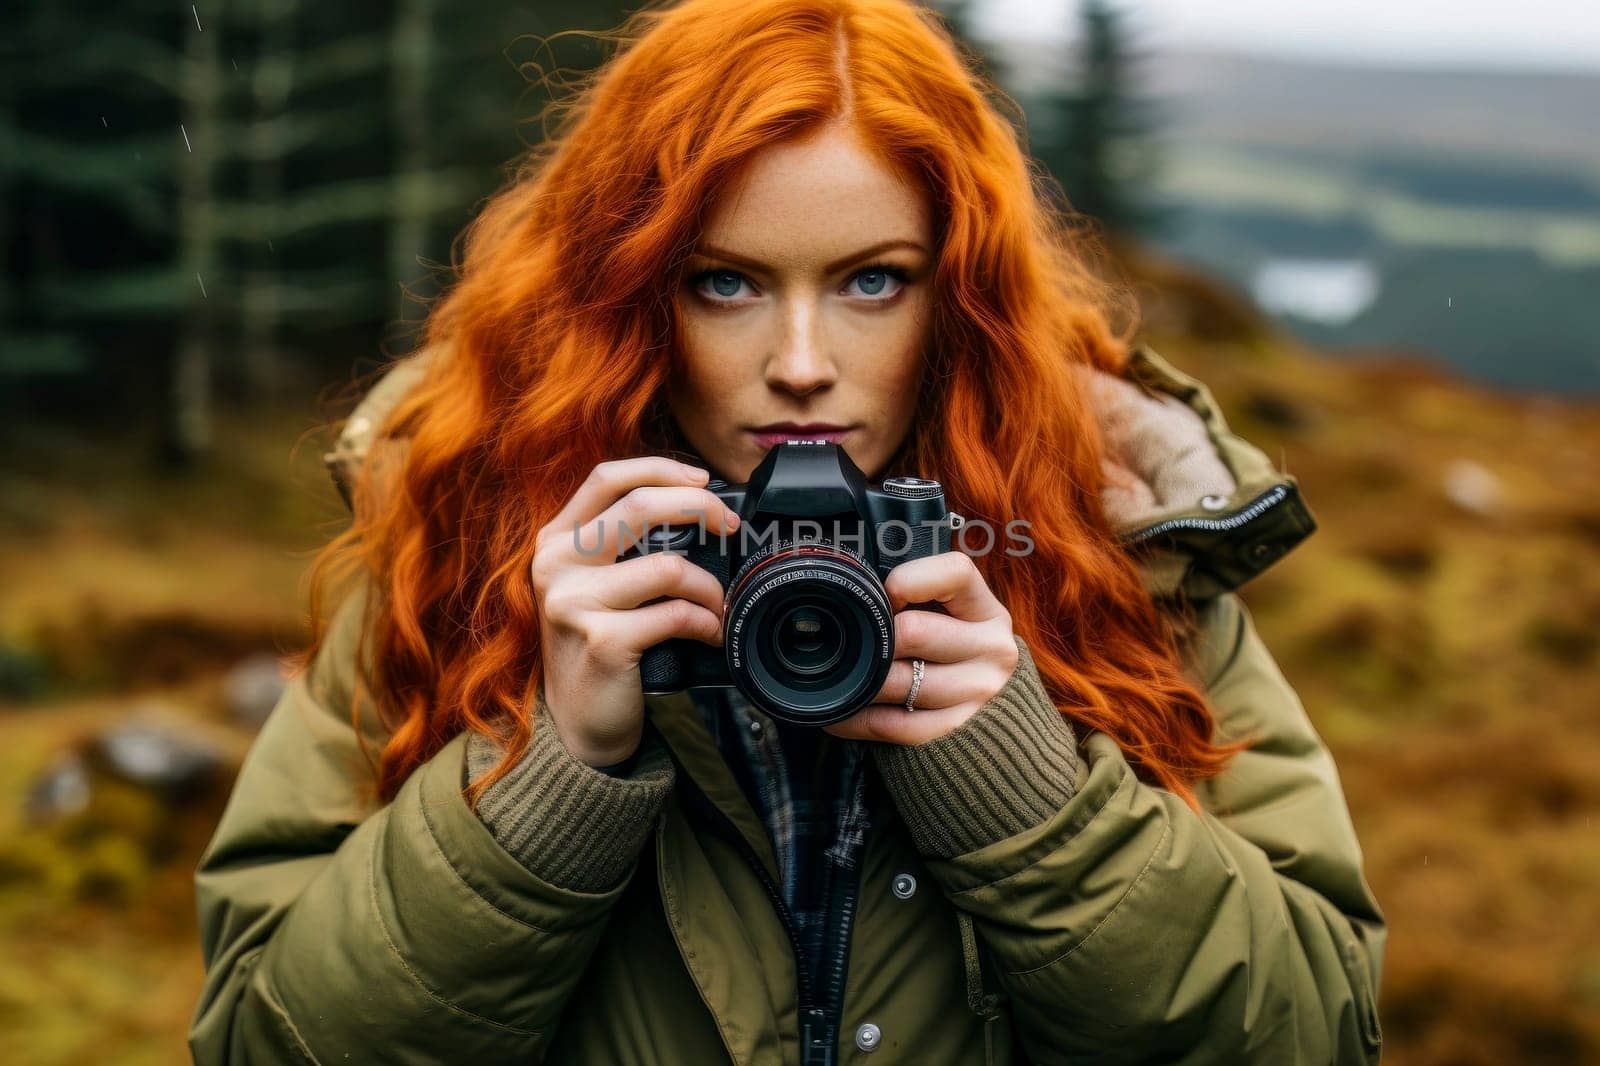 A talented redhead girl captures precious moments with her camera, showcasing her passion for photography